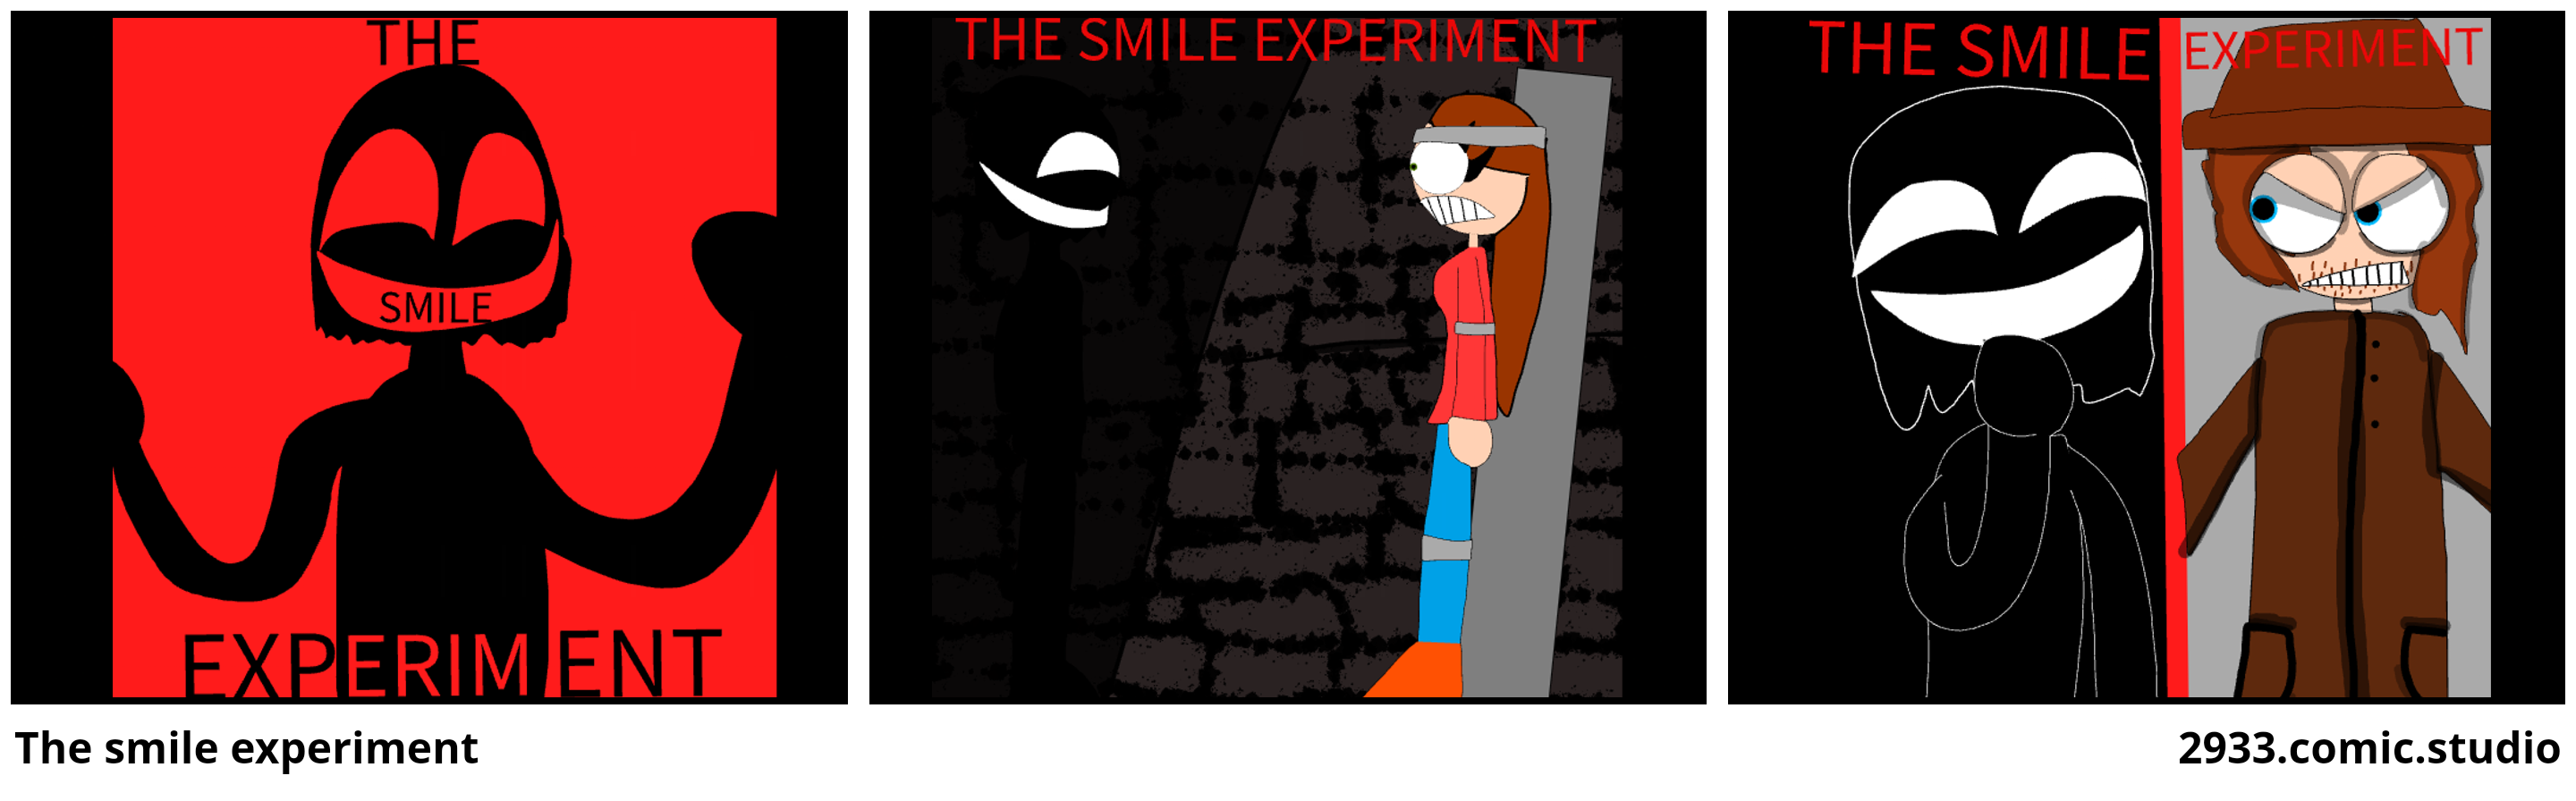 The smile experiment